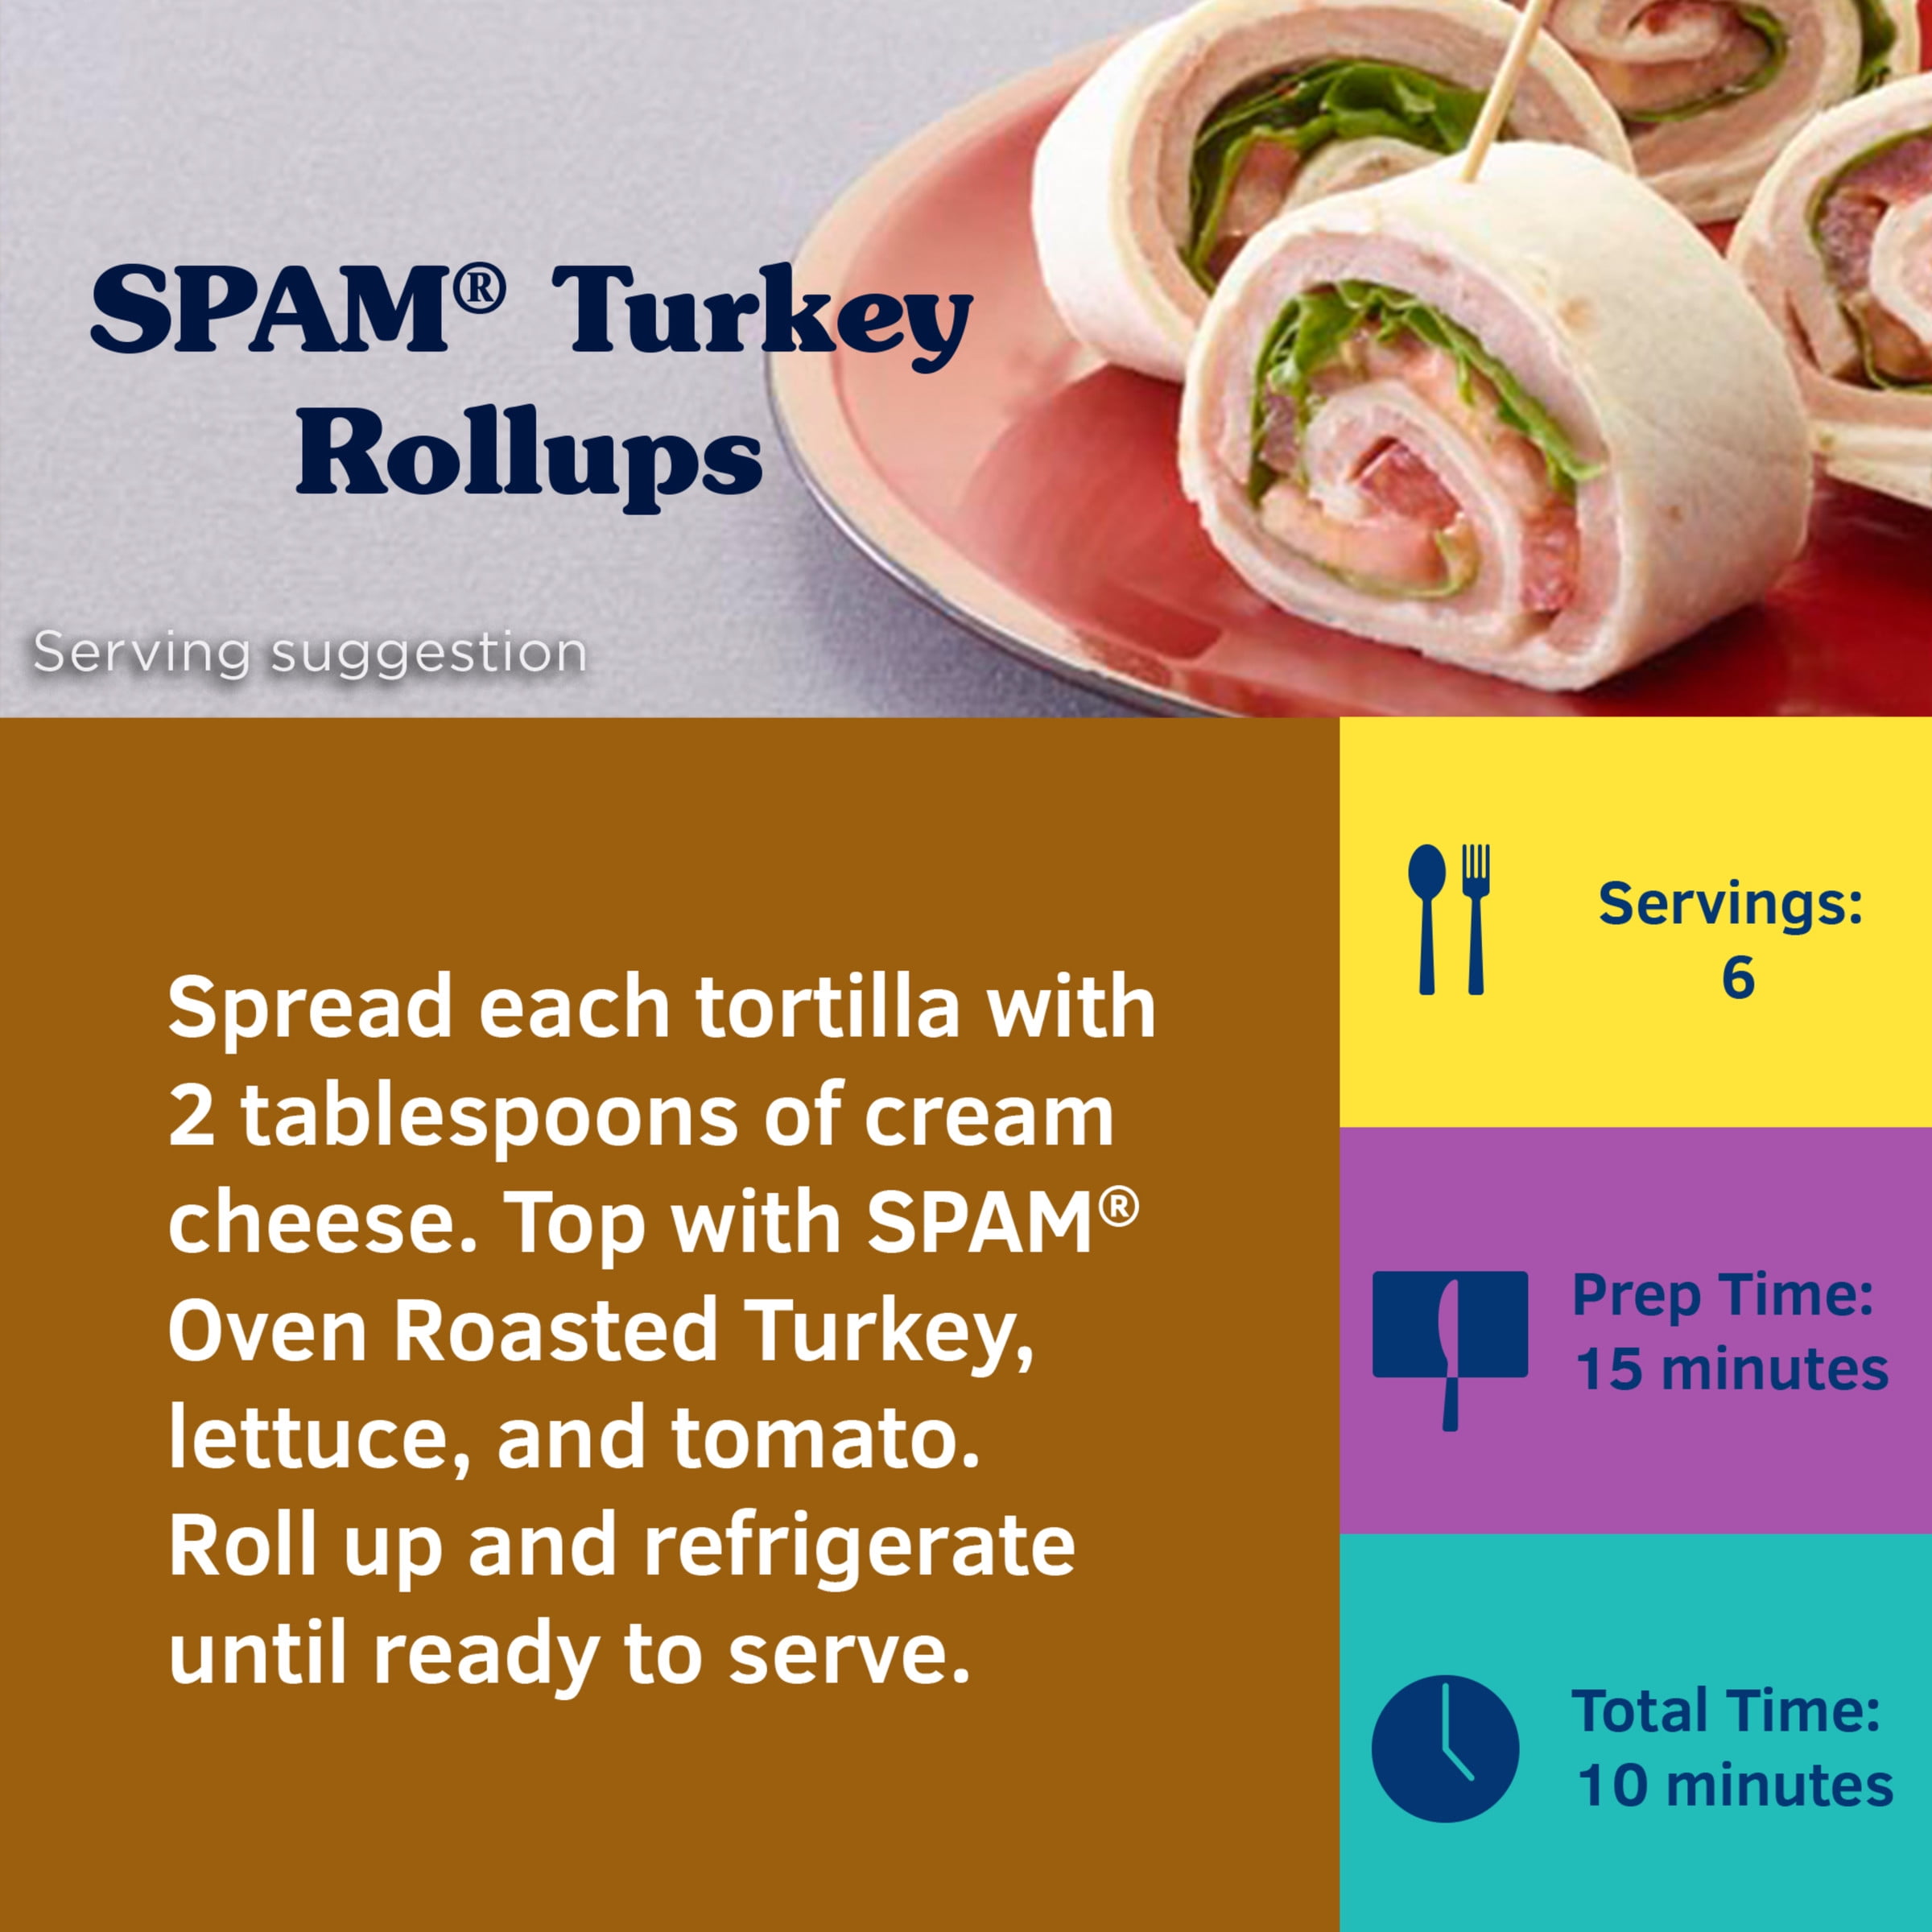 SPAM Oven Roasted Turkey, 12 Ounce (Pack of 12)